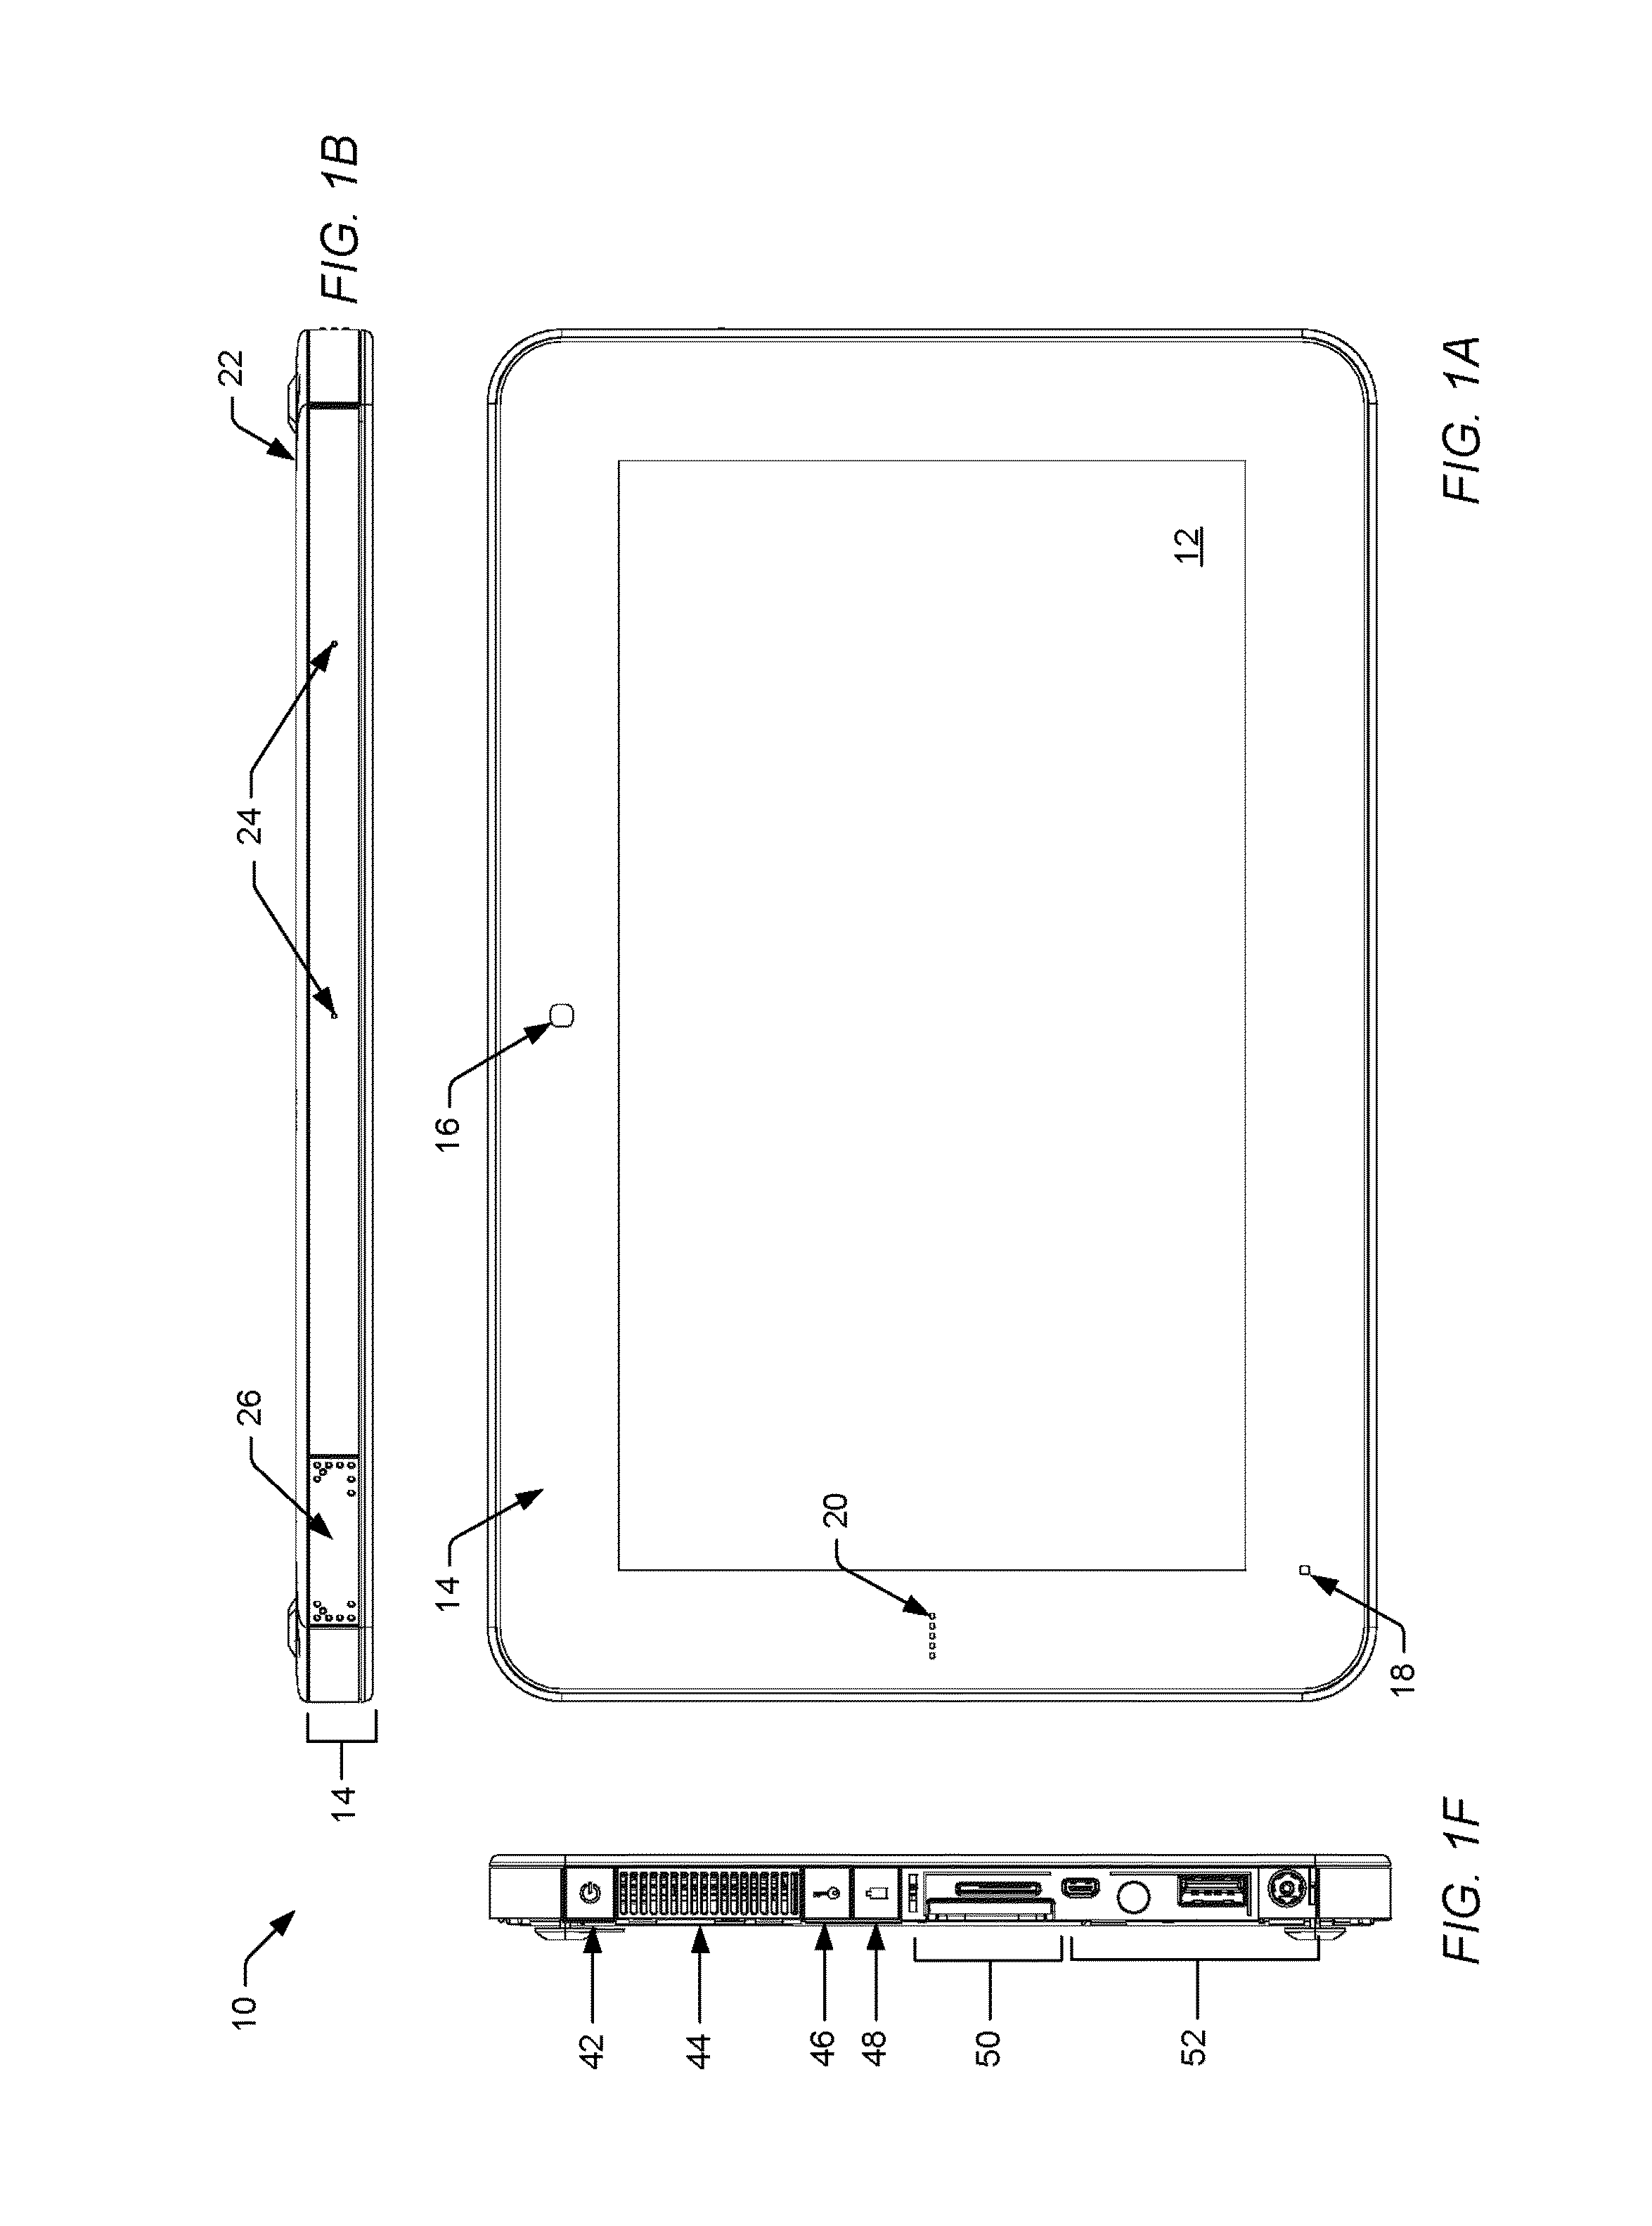 Portable electronic device having integrated peripheral expansion module